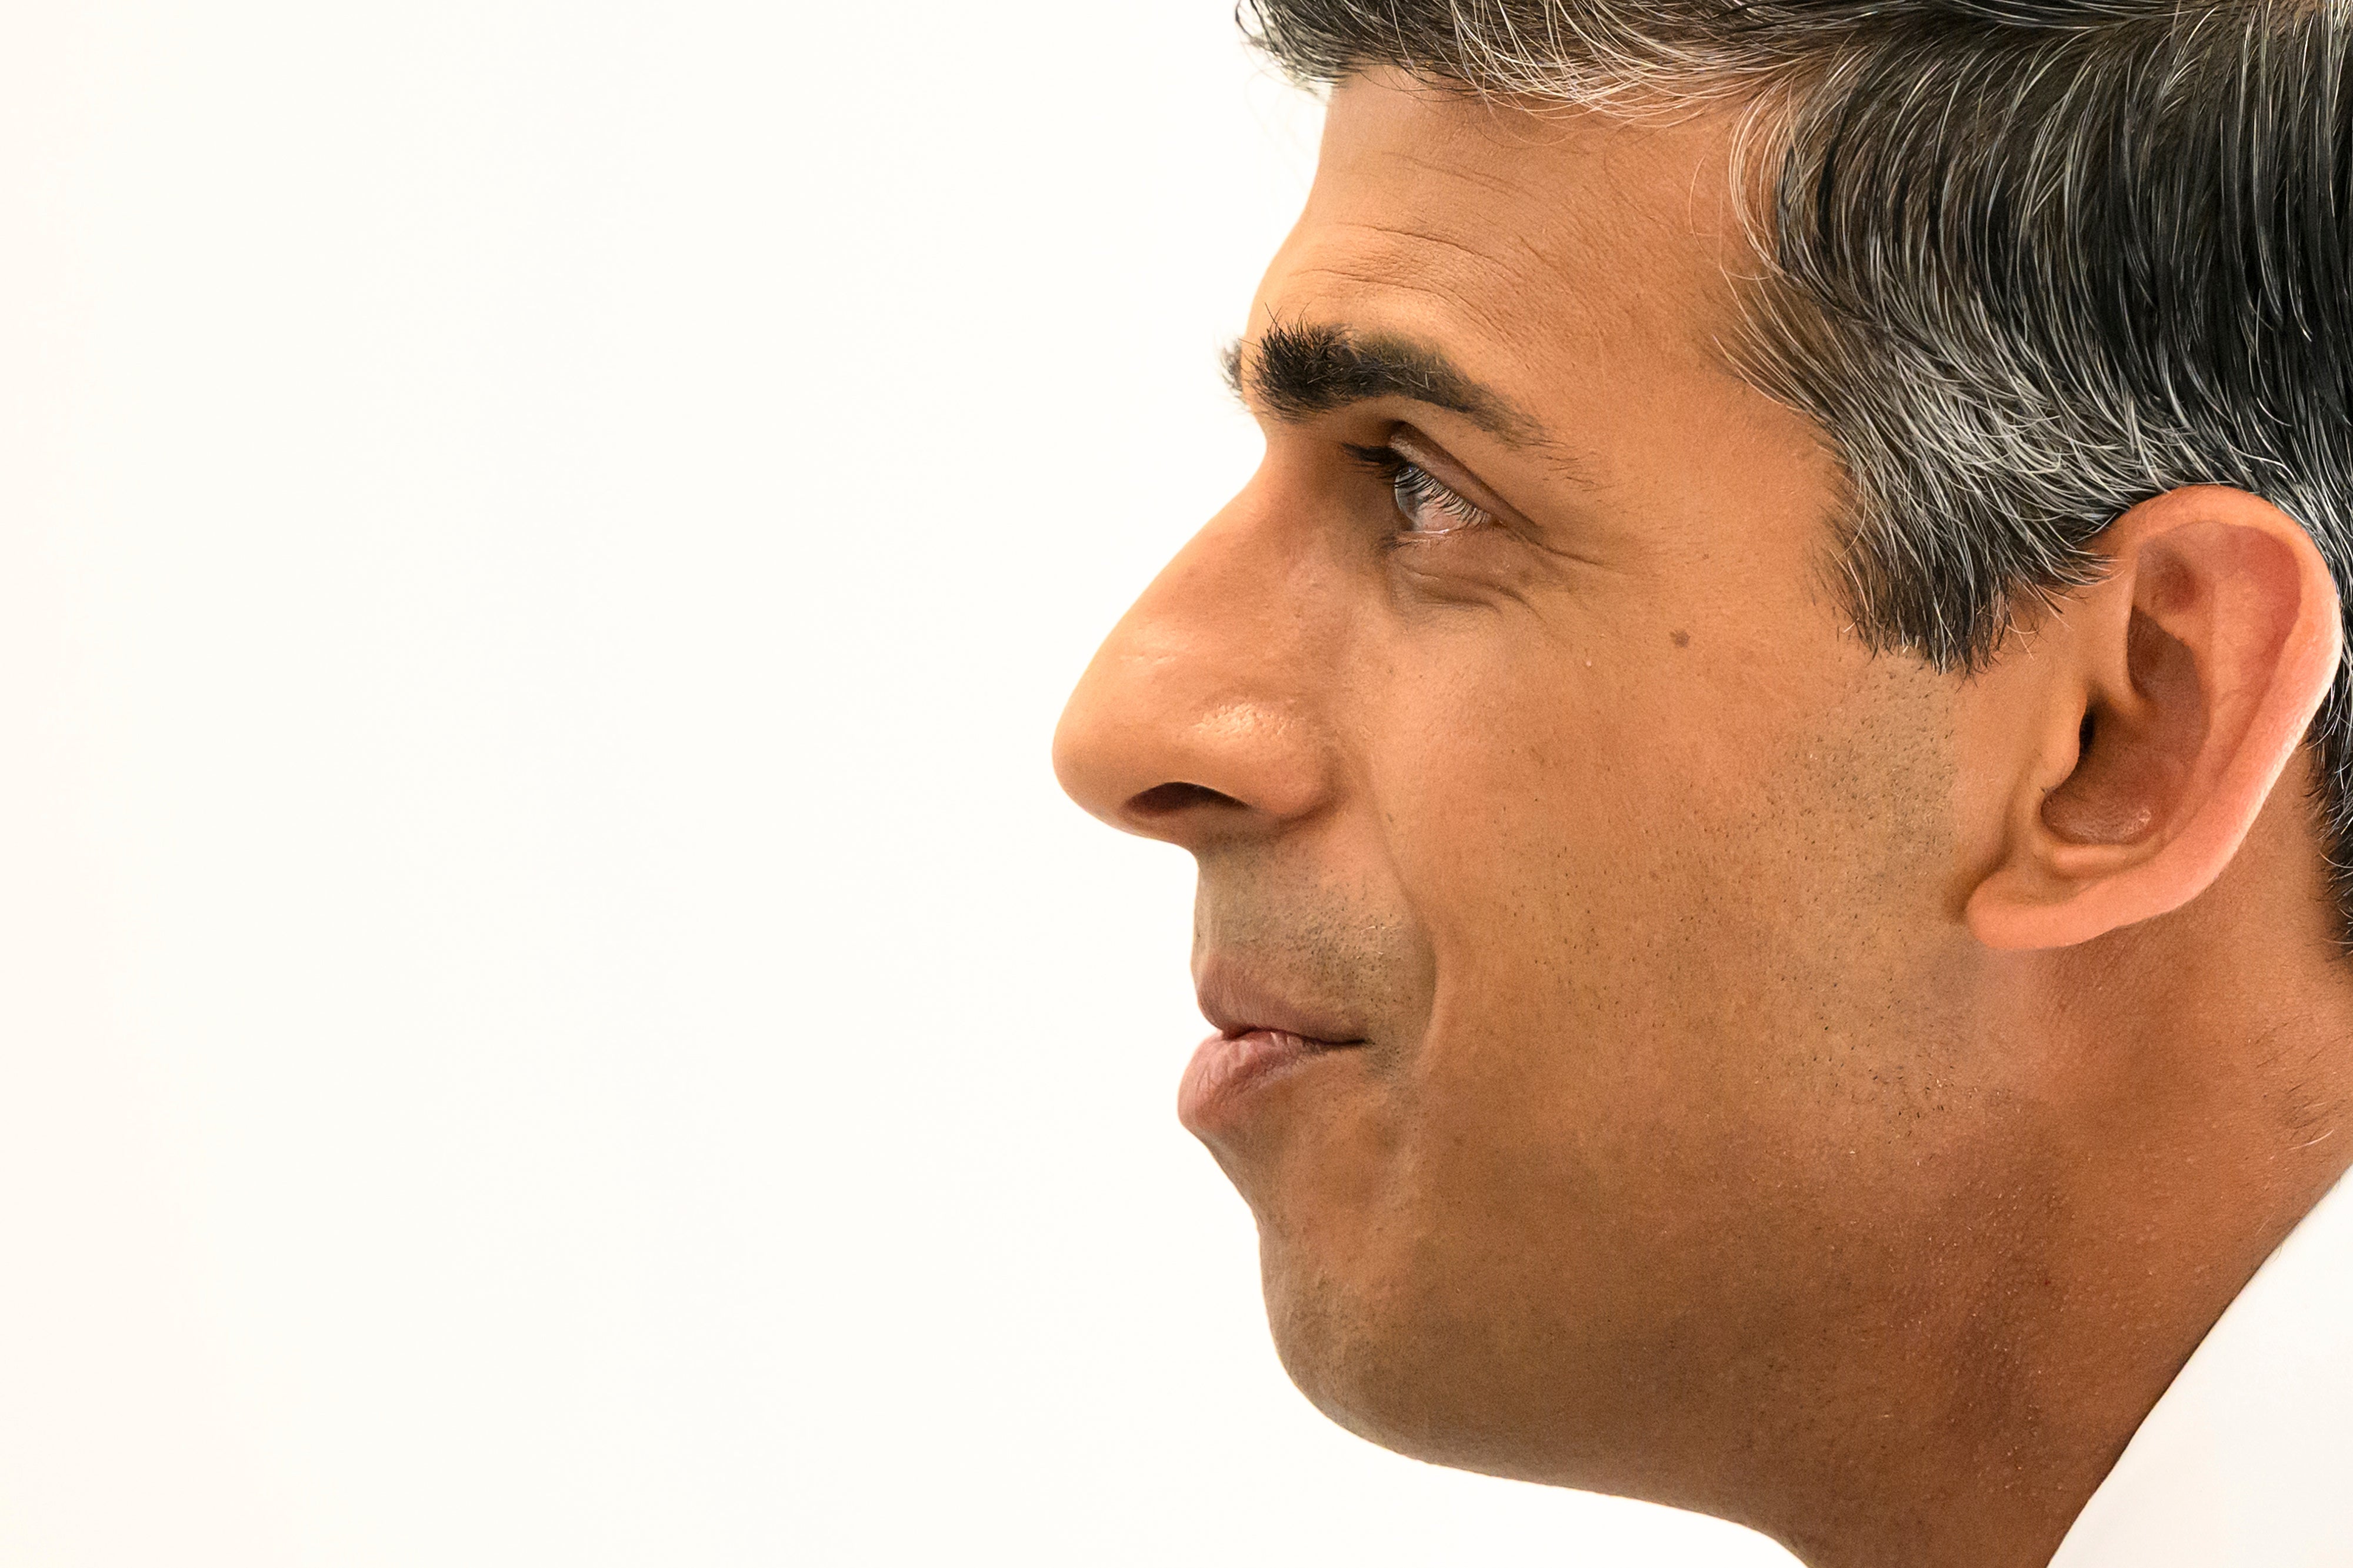 UK prime minister Rishi Sunak has declined to apologise for Britain’s links to the slave trade